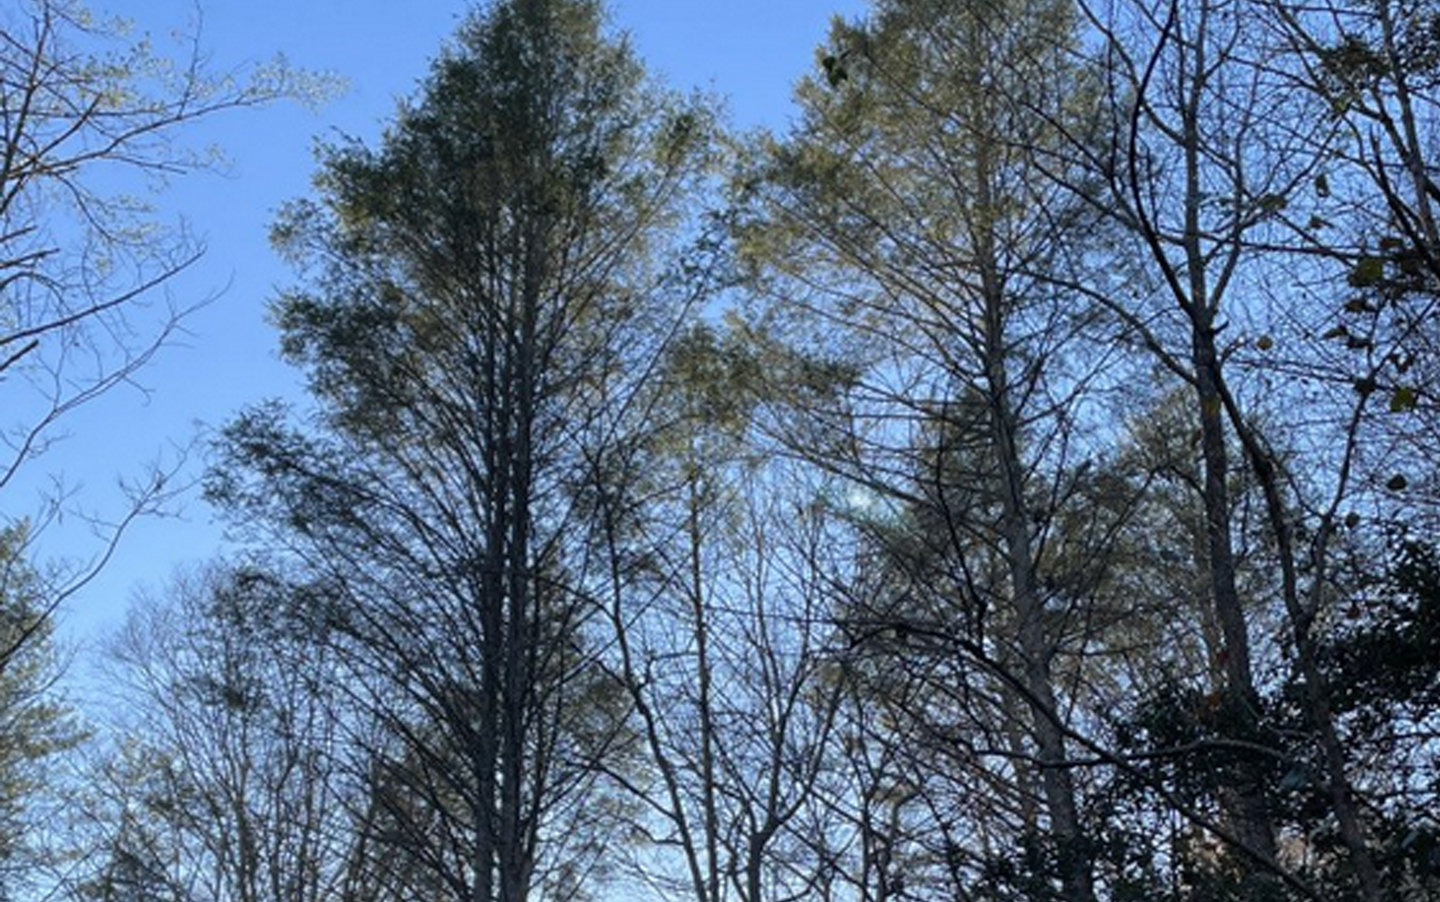 Photo of hemlock trees in Broyhill State Forest